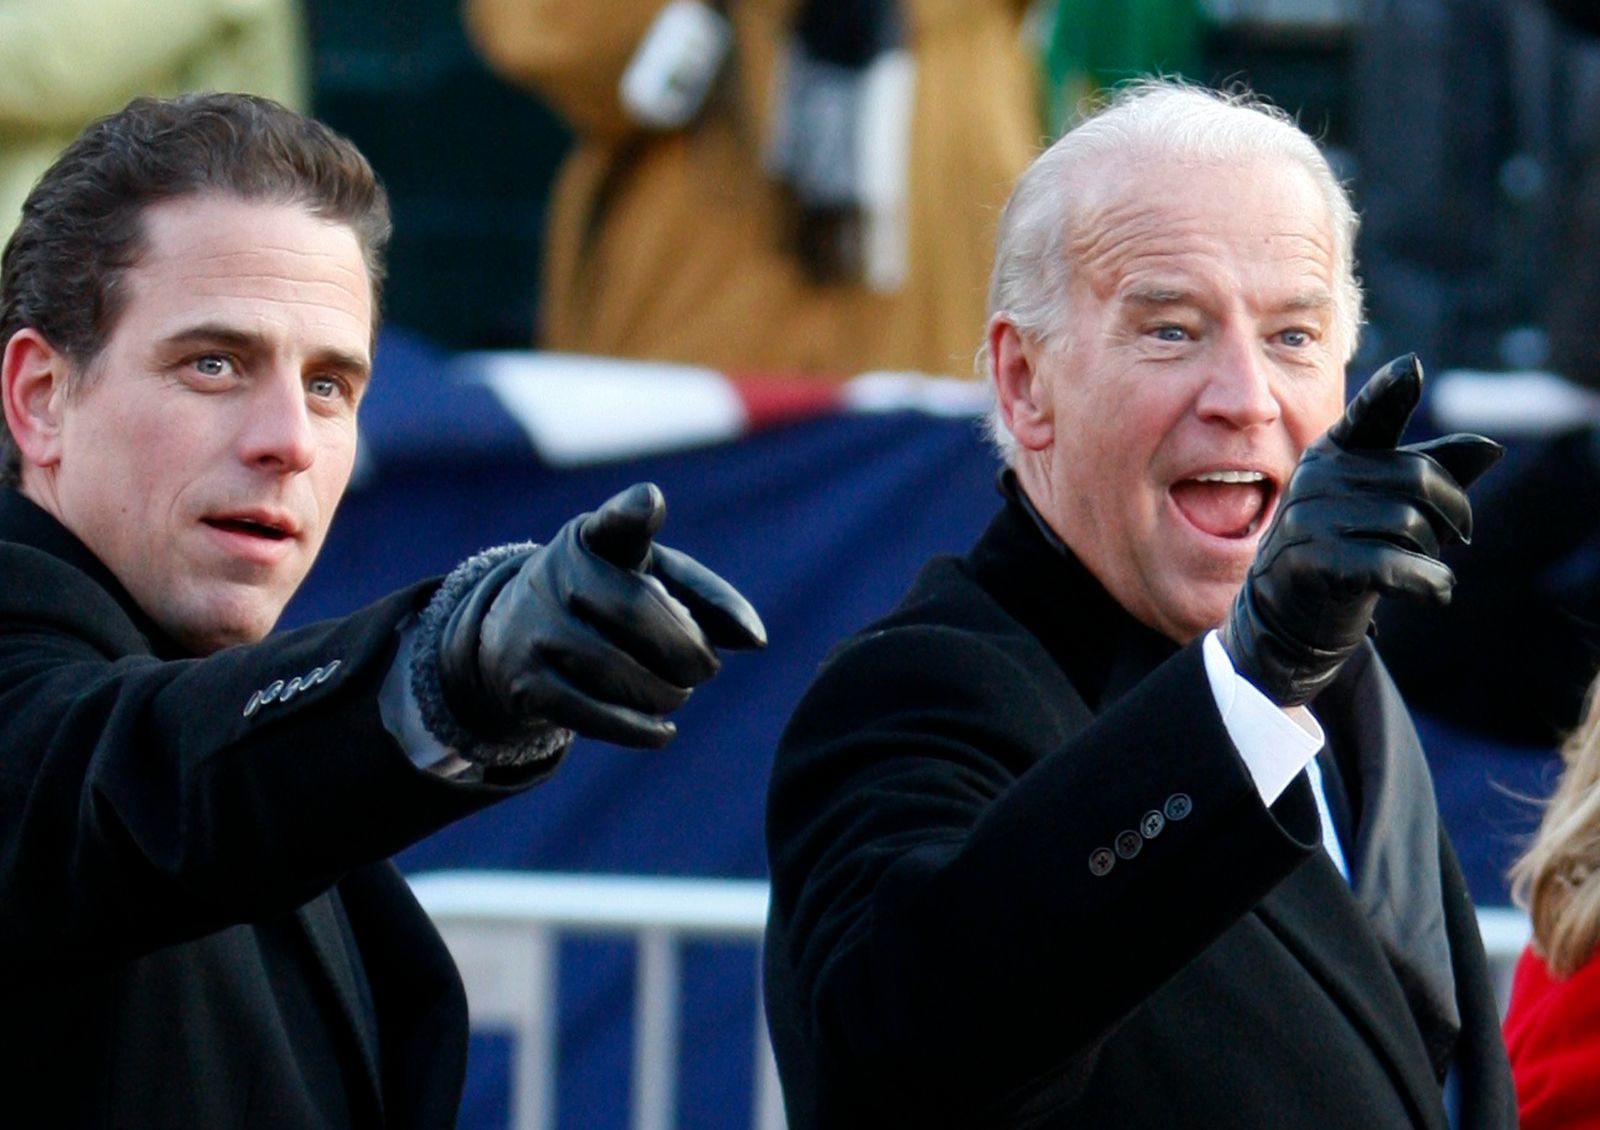 U.S. Vice President Biden and son Hunter gesture as they walk down Pennsylvania Avenue - REUTERS